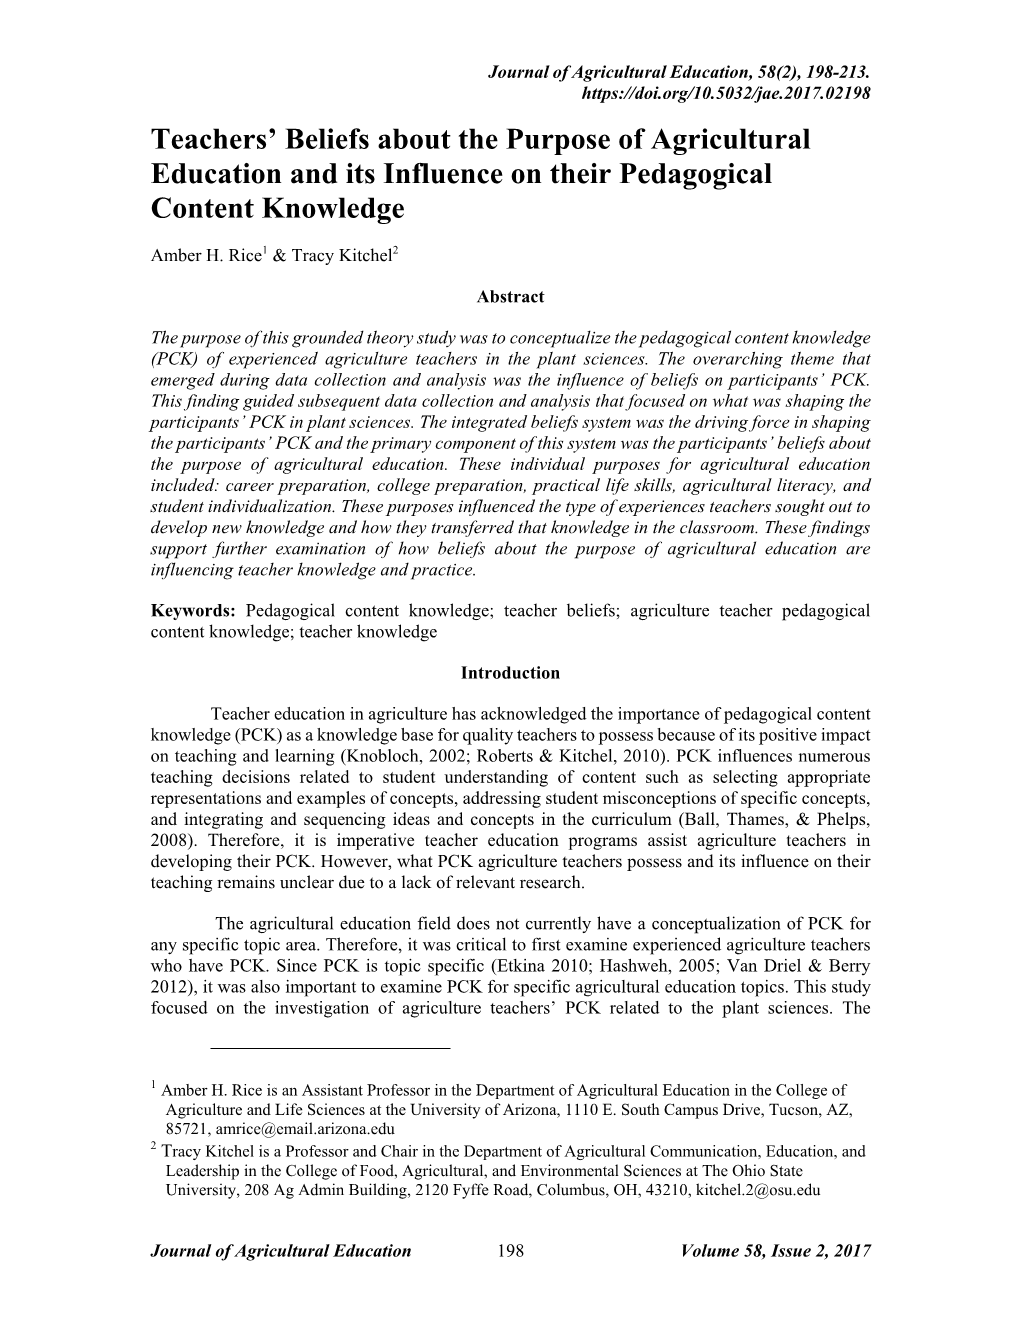 Teachers' Beliefs About the Purpose of Agricultural Education and Its